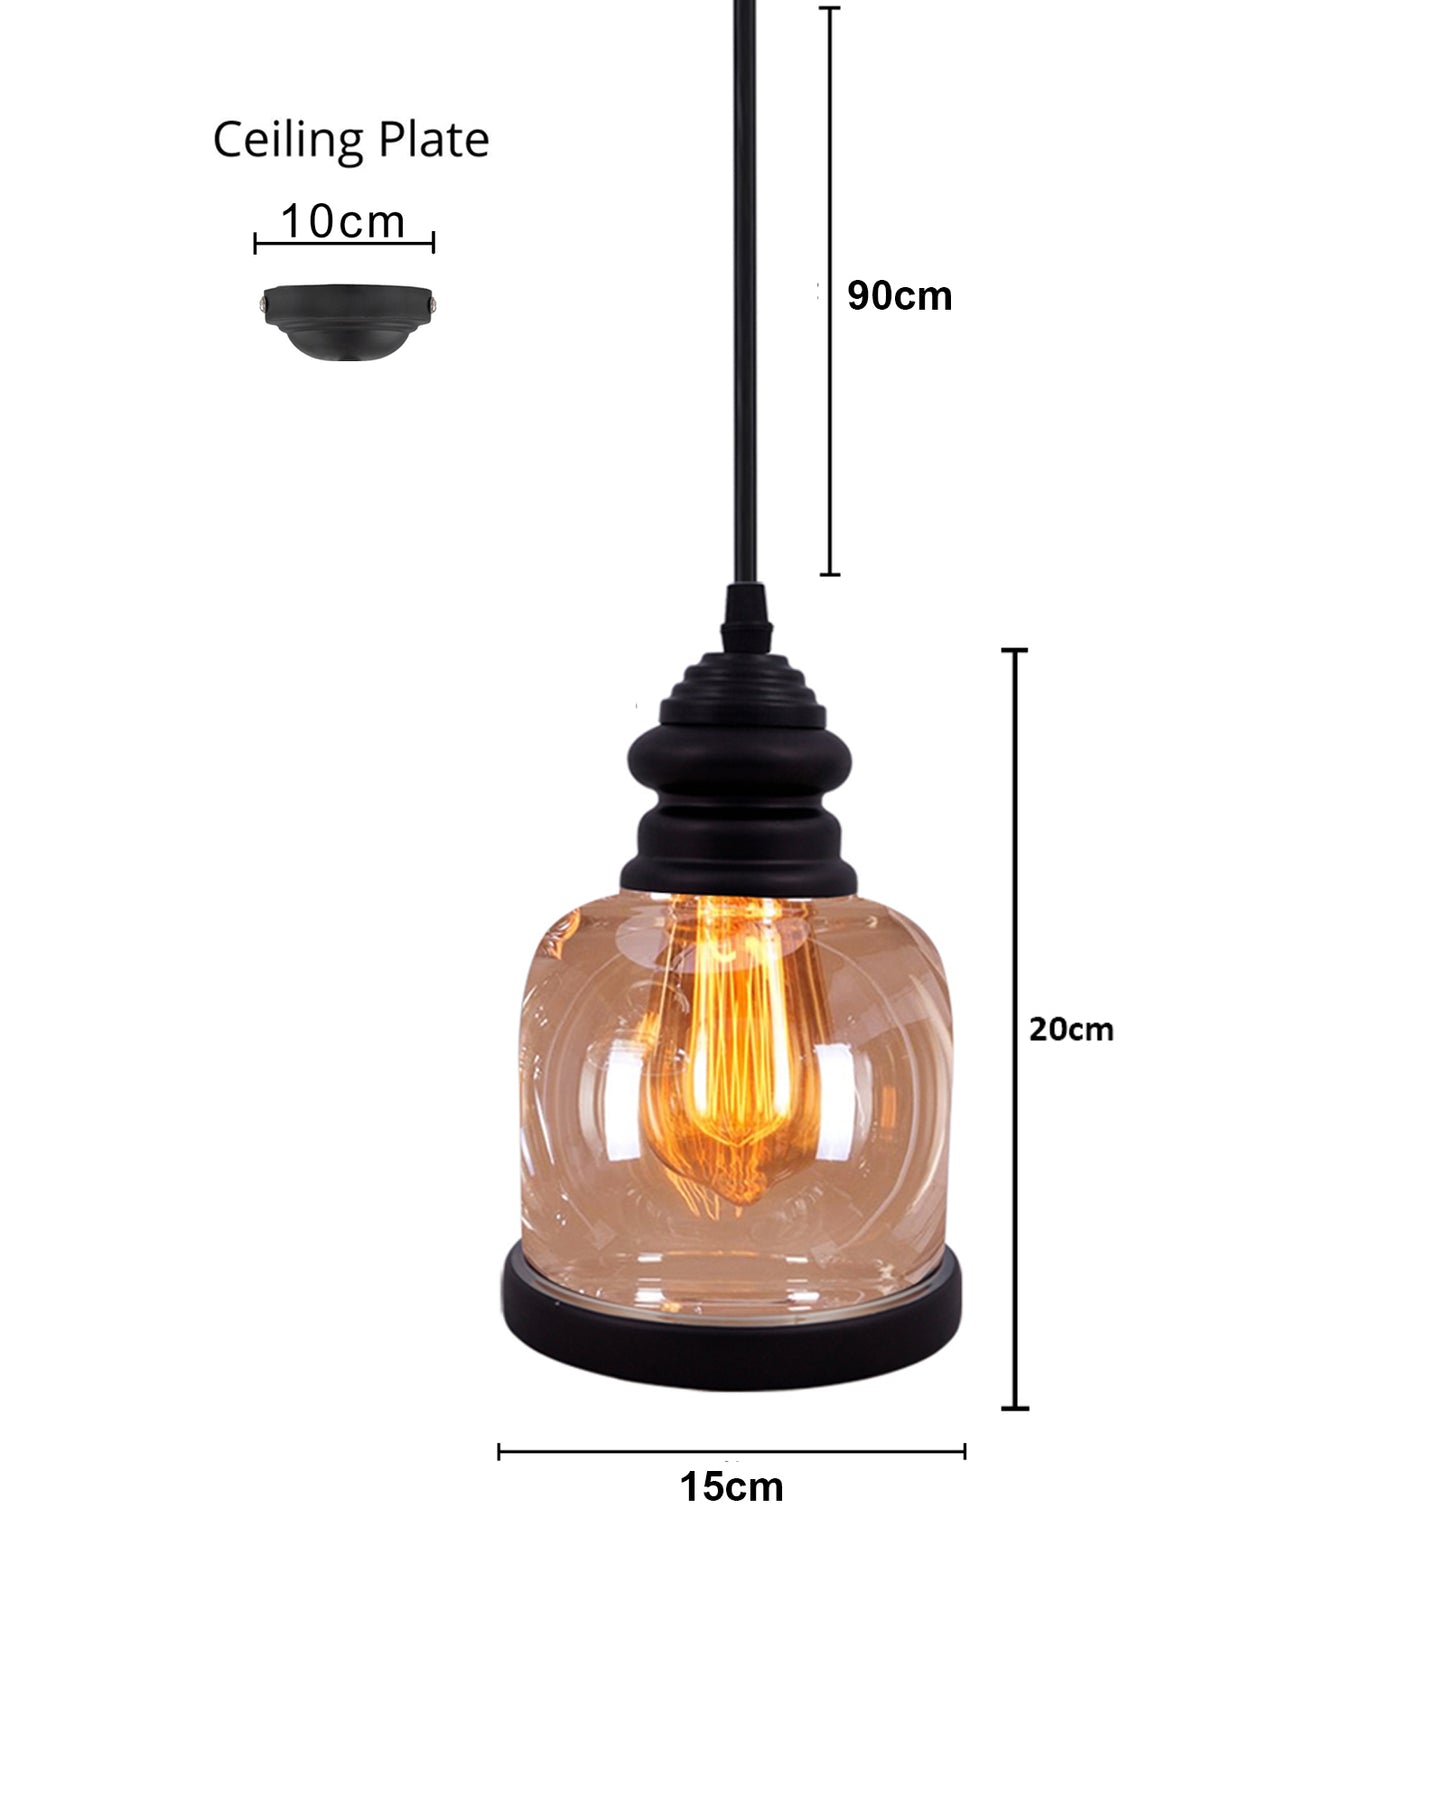 Cylinder Pendant Light with Amber Glass Jar Shade Matte Adjustable Hanging Lighting Fixture, Industrial Antique Pendant Lamp for Kitchen Island, Dining Room, Foyer, Farmhouse